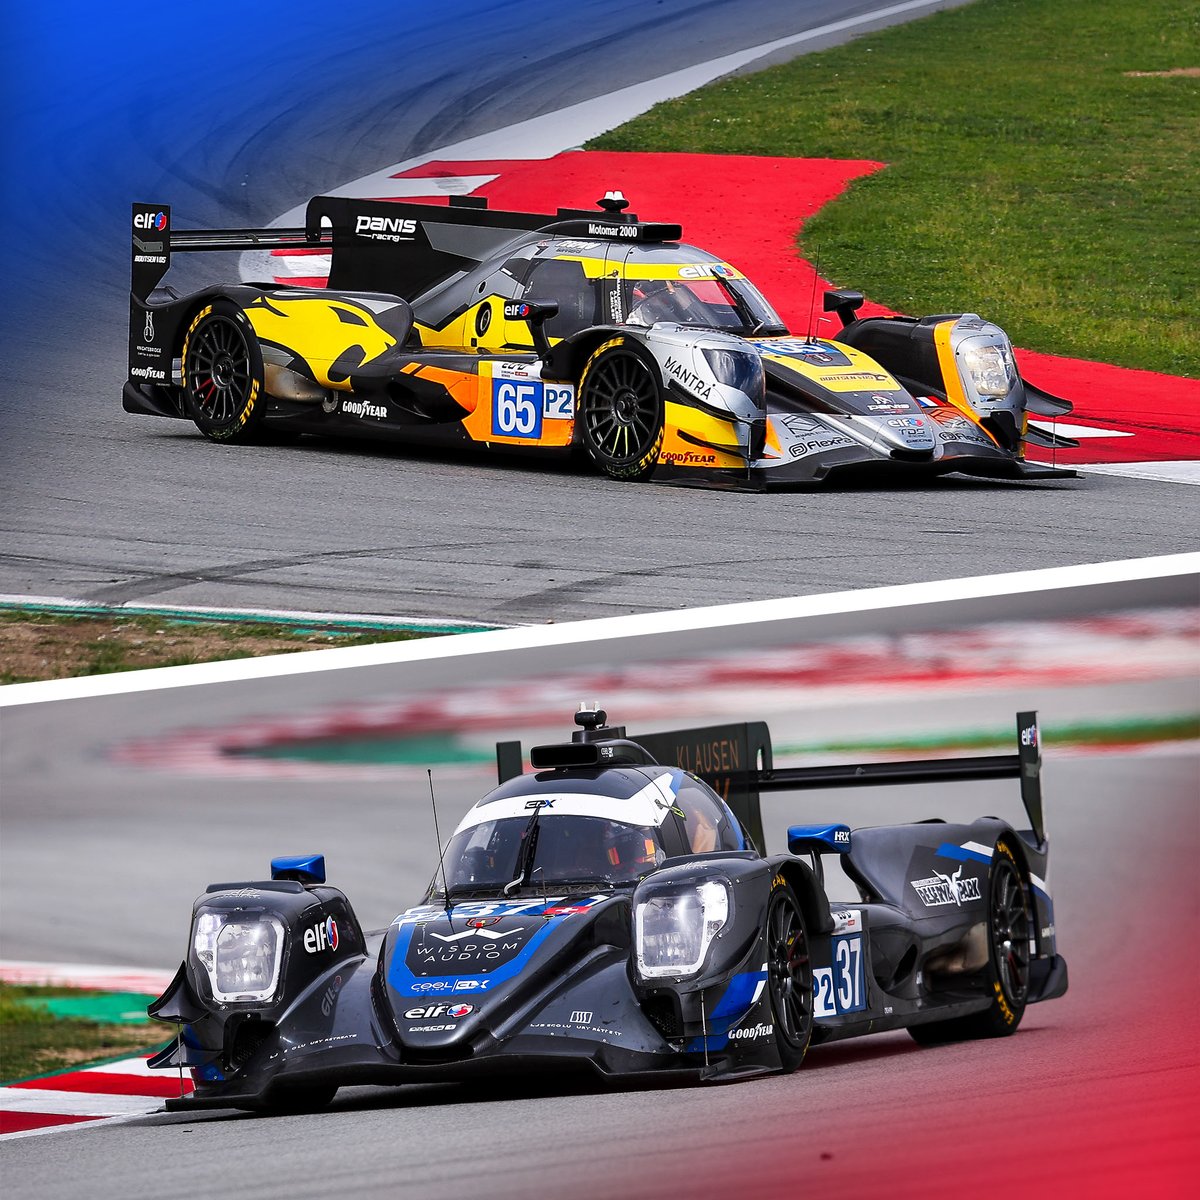 A new season of European Le Mans Series kicks off this week with the 4 Hours of Barcelona! 🔥 Let's wish the very best to our partner teams @panisracing & @COOLRacing! ✨ #Elf #Endurance #ELMS